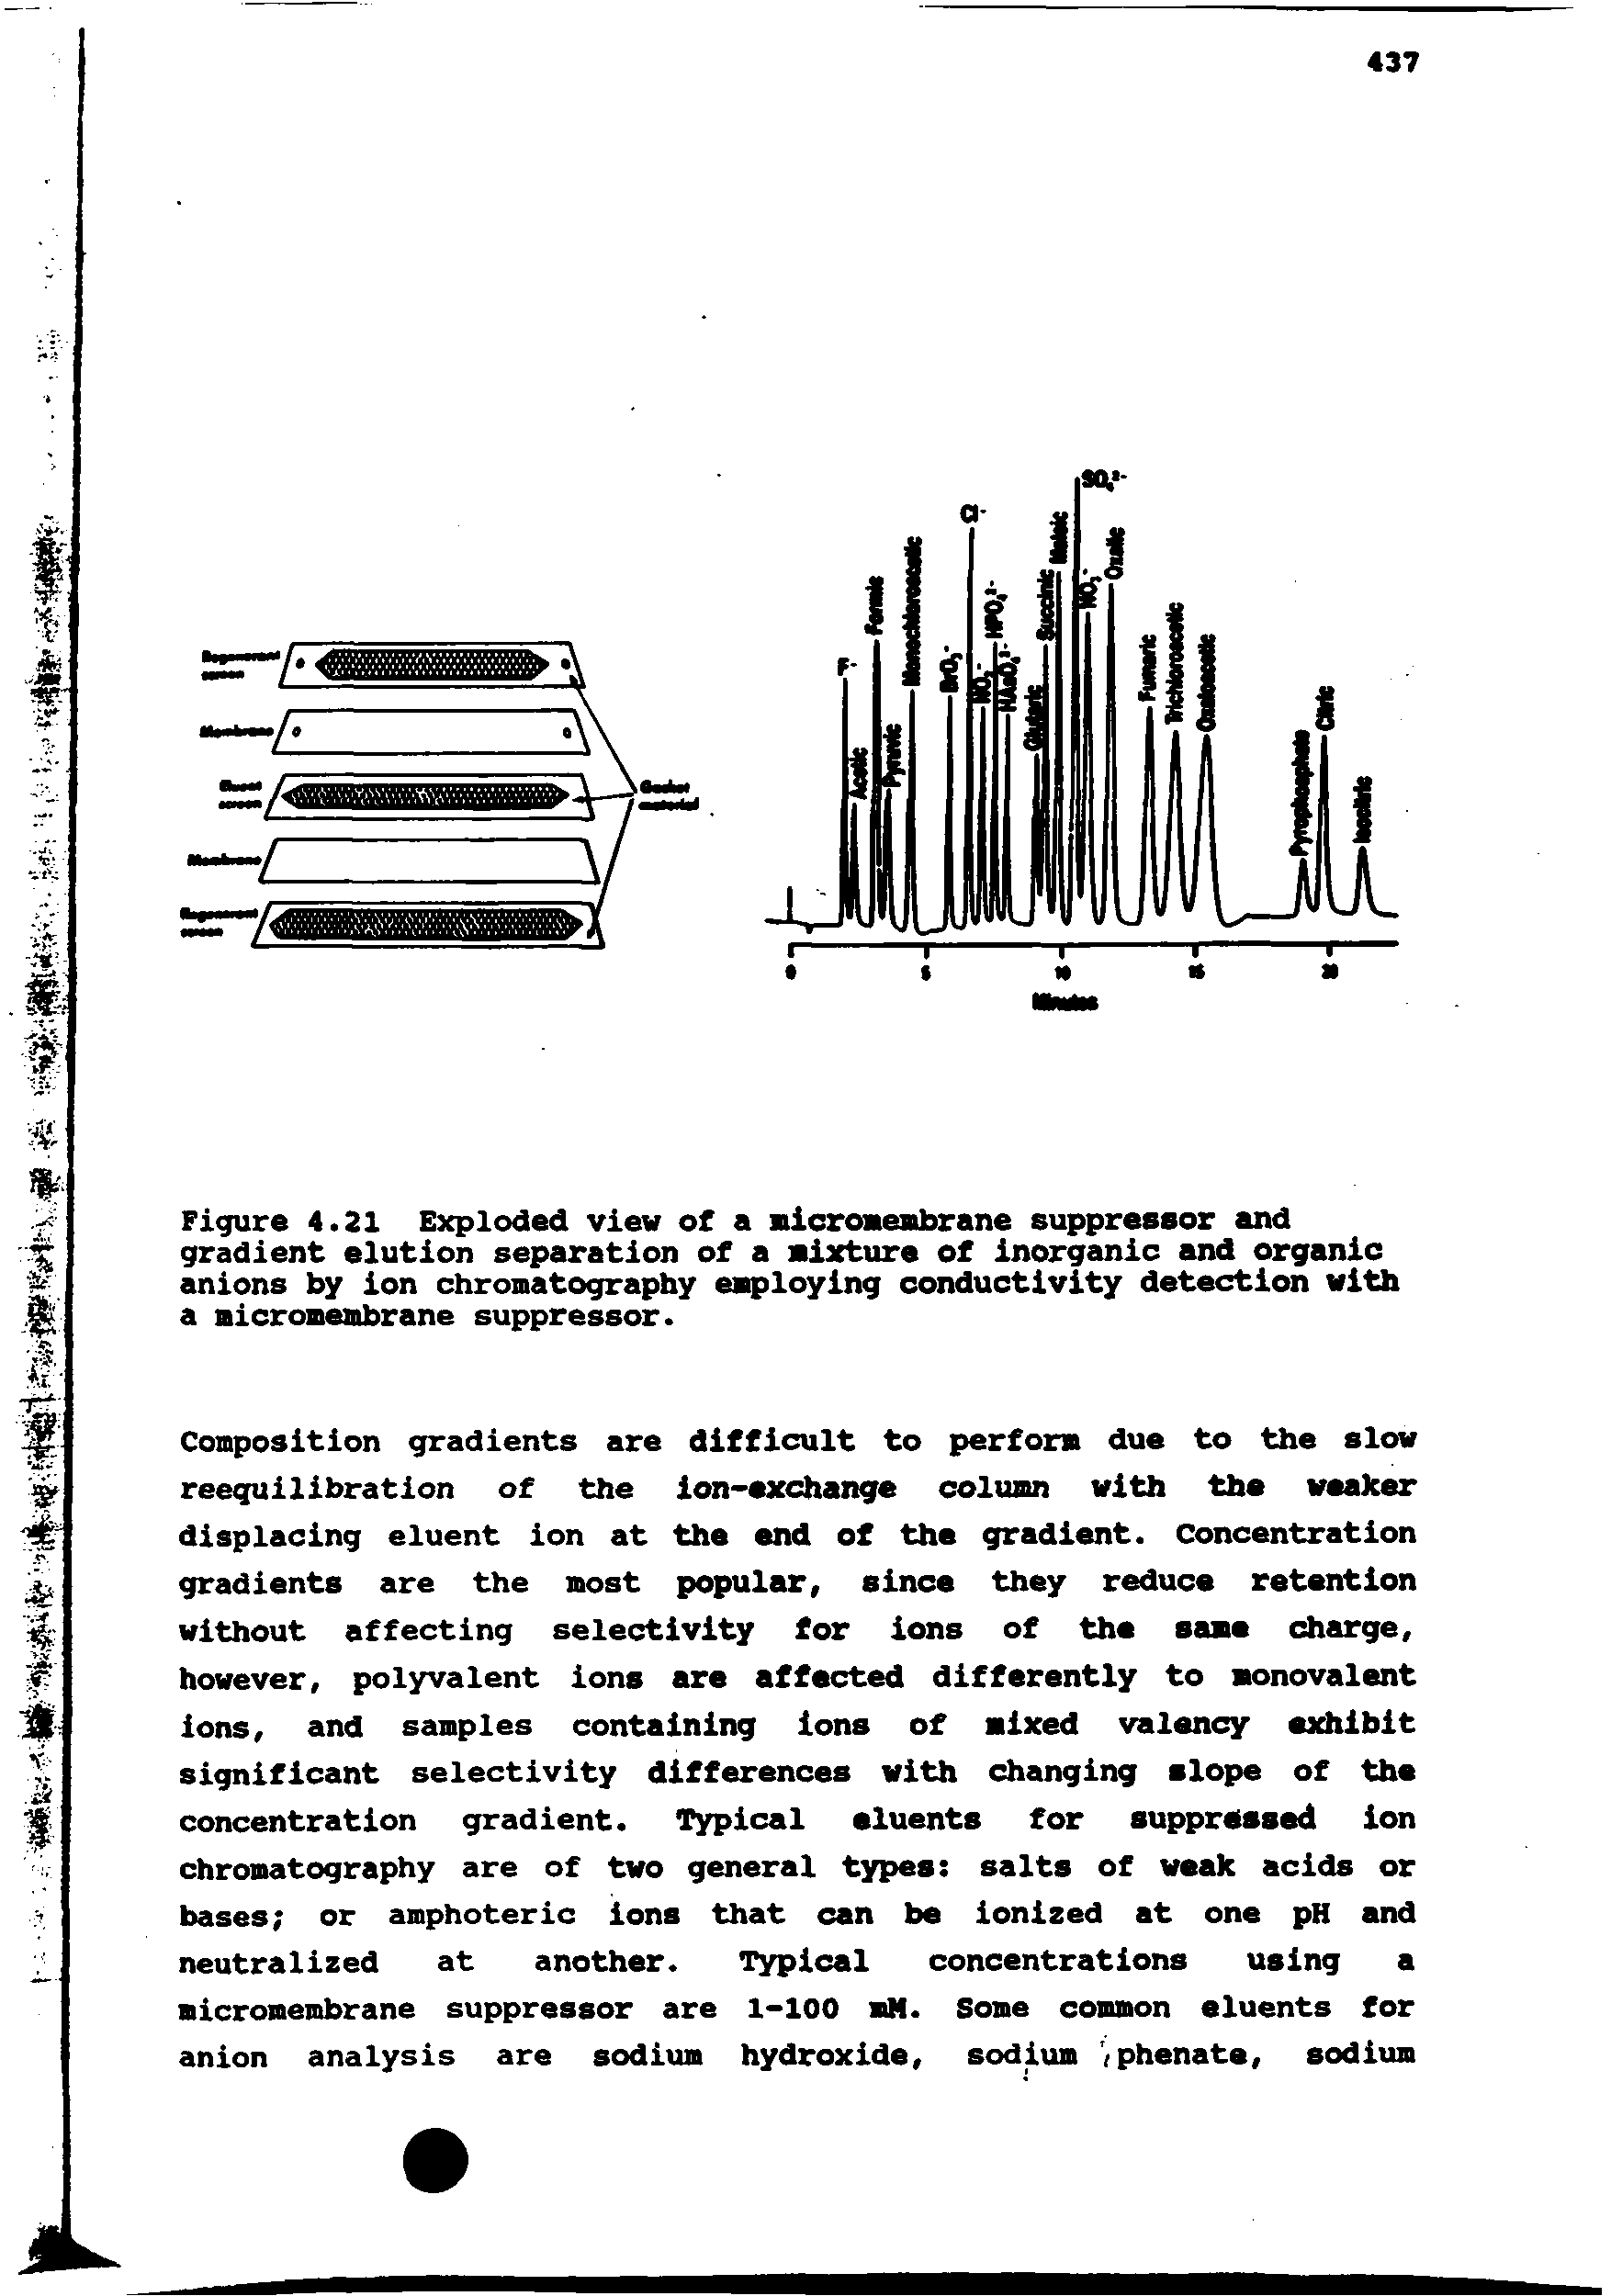 Figure 4.21 Exploded view of a nlcroaeBbrane suppressor and gradient elution separation of a aixture of inorgemic and organic anions by ion chromatography employing conductivity detection with a mlcromembrane suppressor.